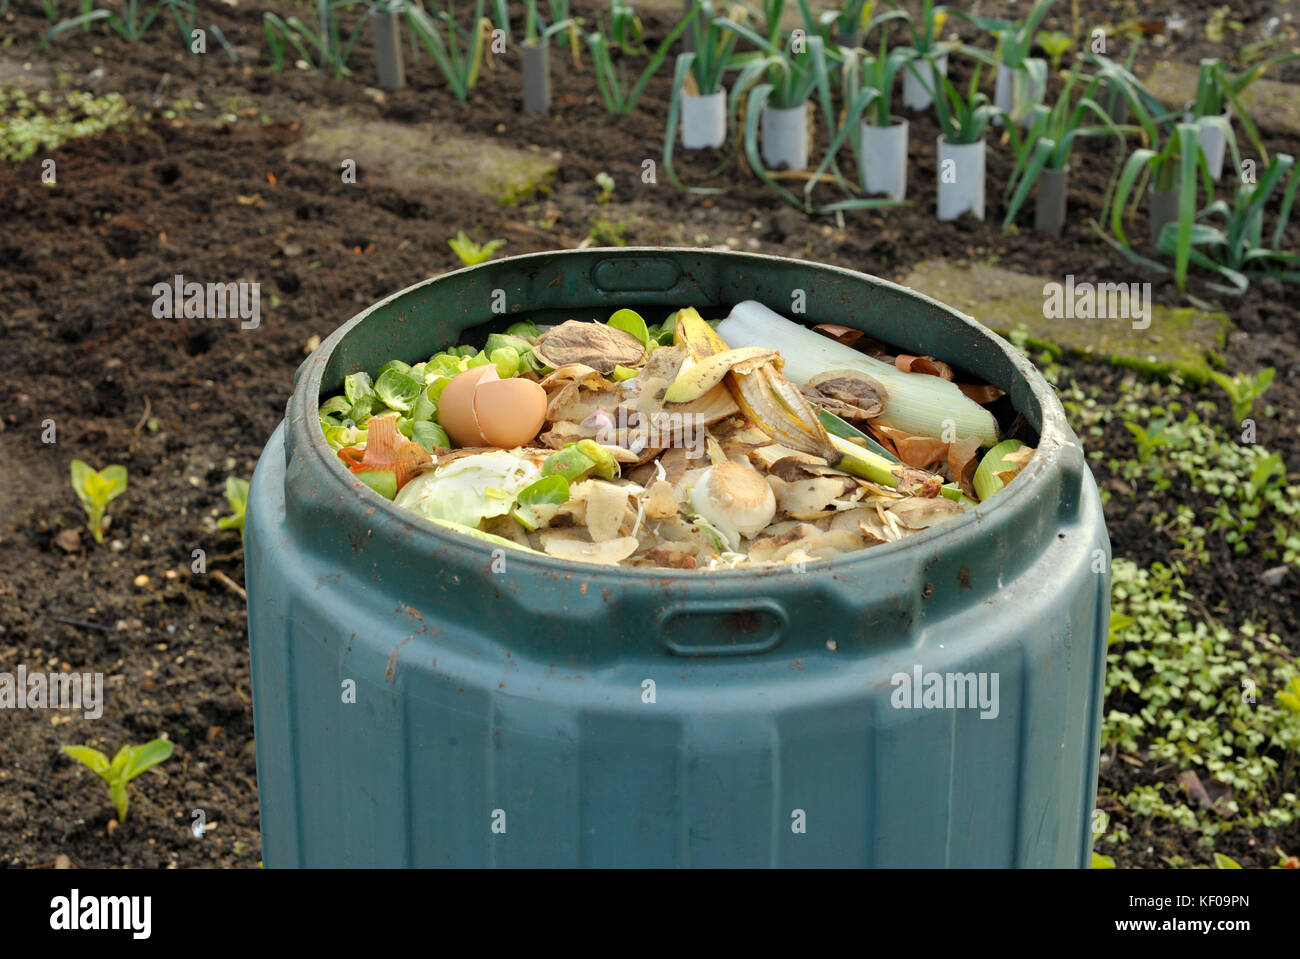 Garden compost bin for recycling kitchen food and garden waste including fruit and vegetable peelings, tea bags and egg shells. Stock Photo